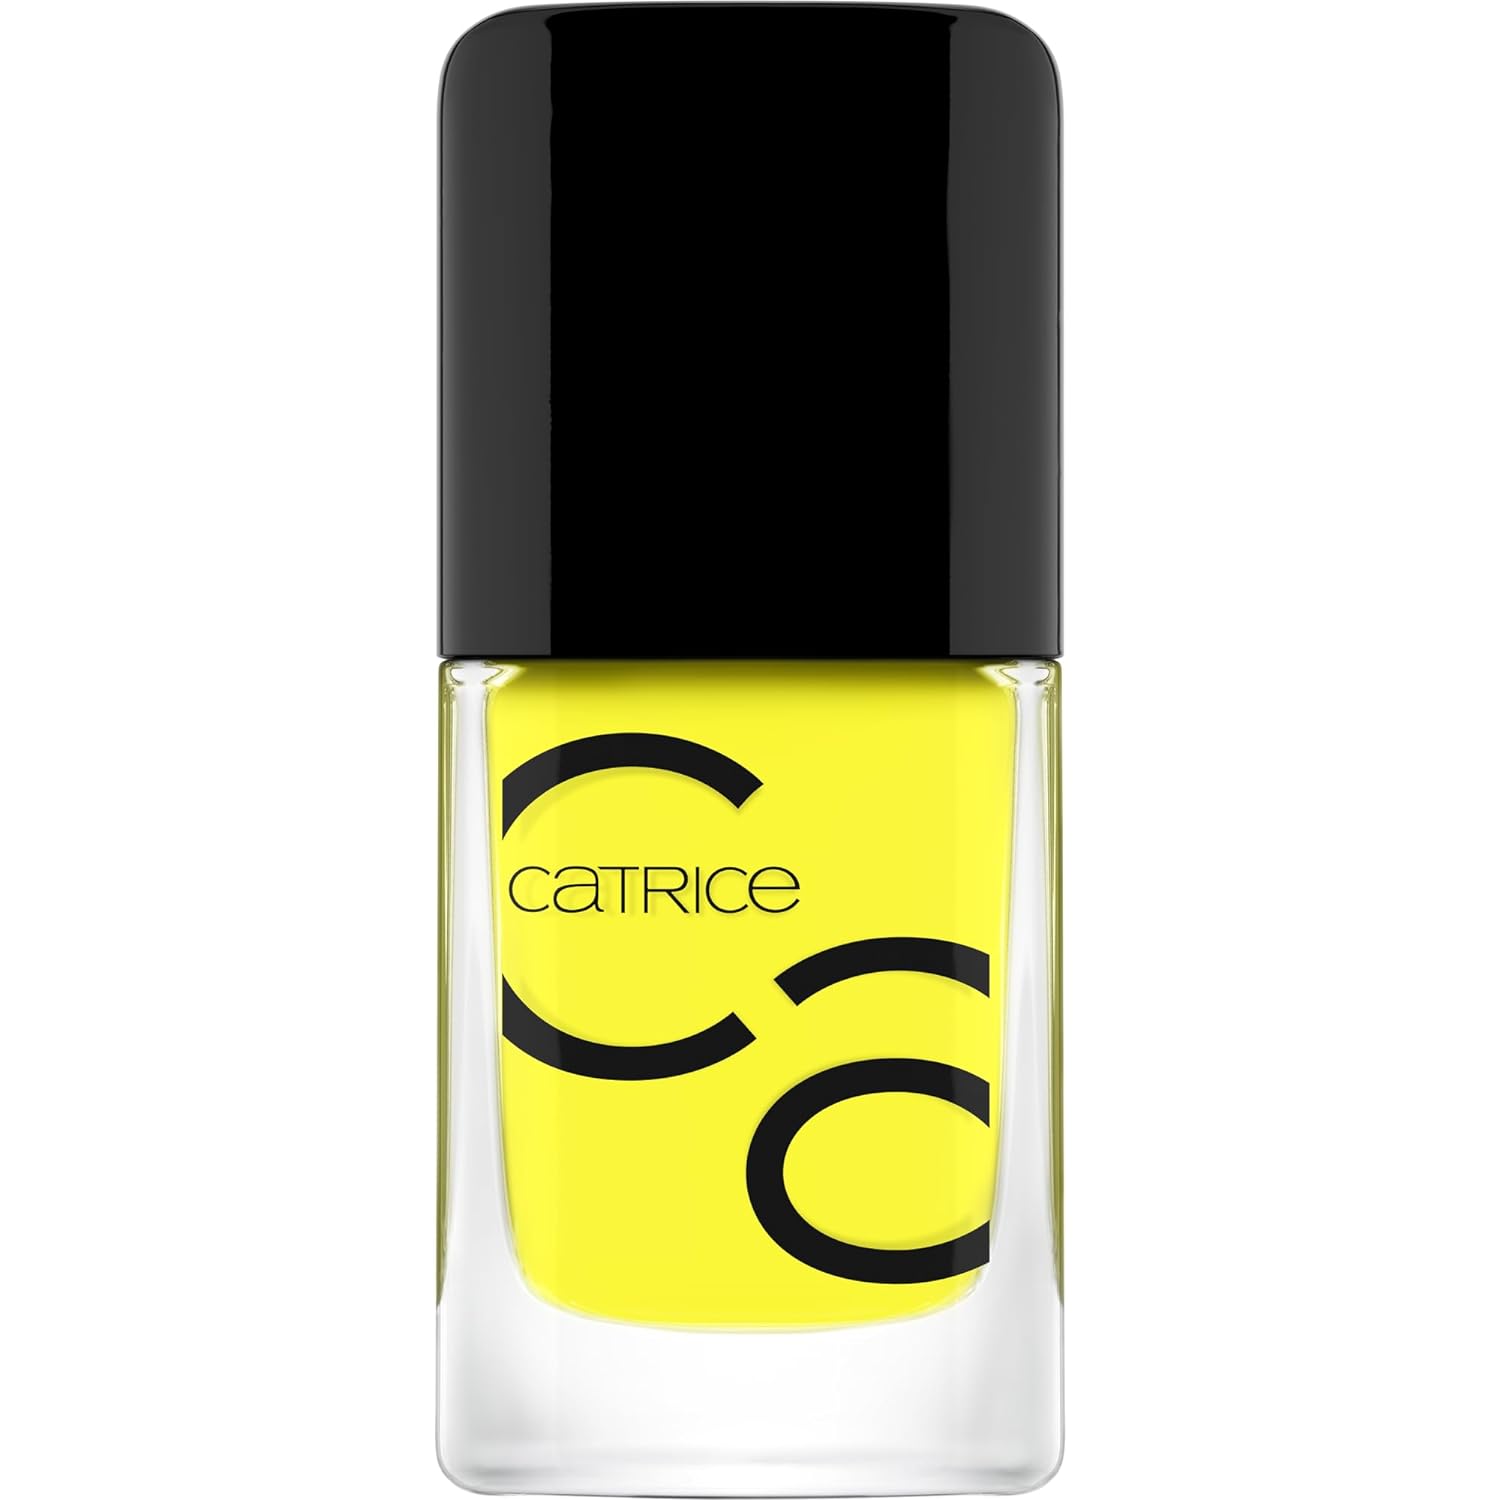 Catrice Catrice Iconails Gel Lacquer, Nail Polish, No. 171, Yellow, Long-Lasting, Shiny, Acetone-Free, vegan, no Microplastic Particles, no Preservatives, Pack of 10.5 ml